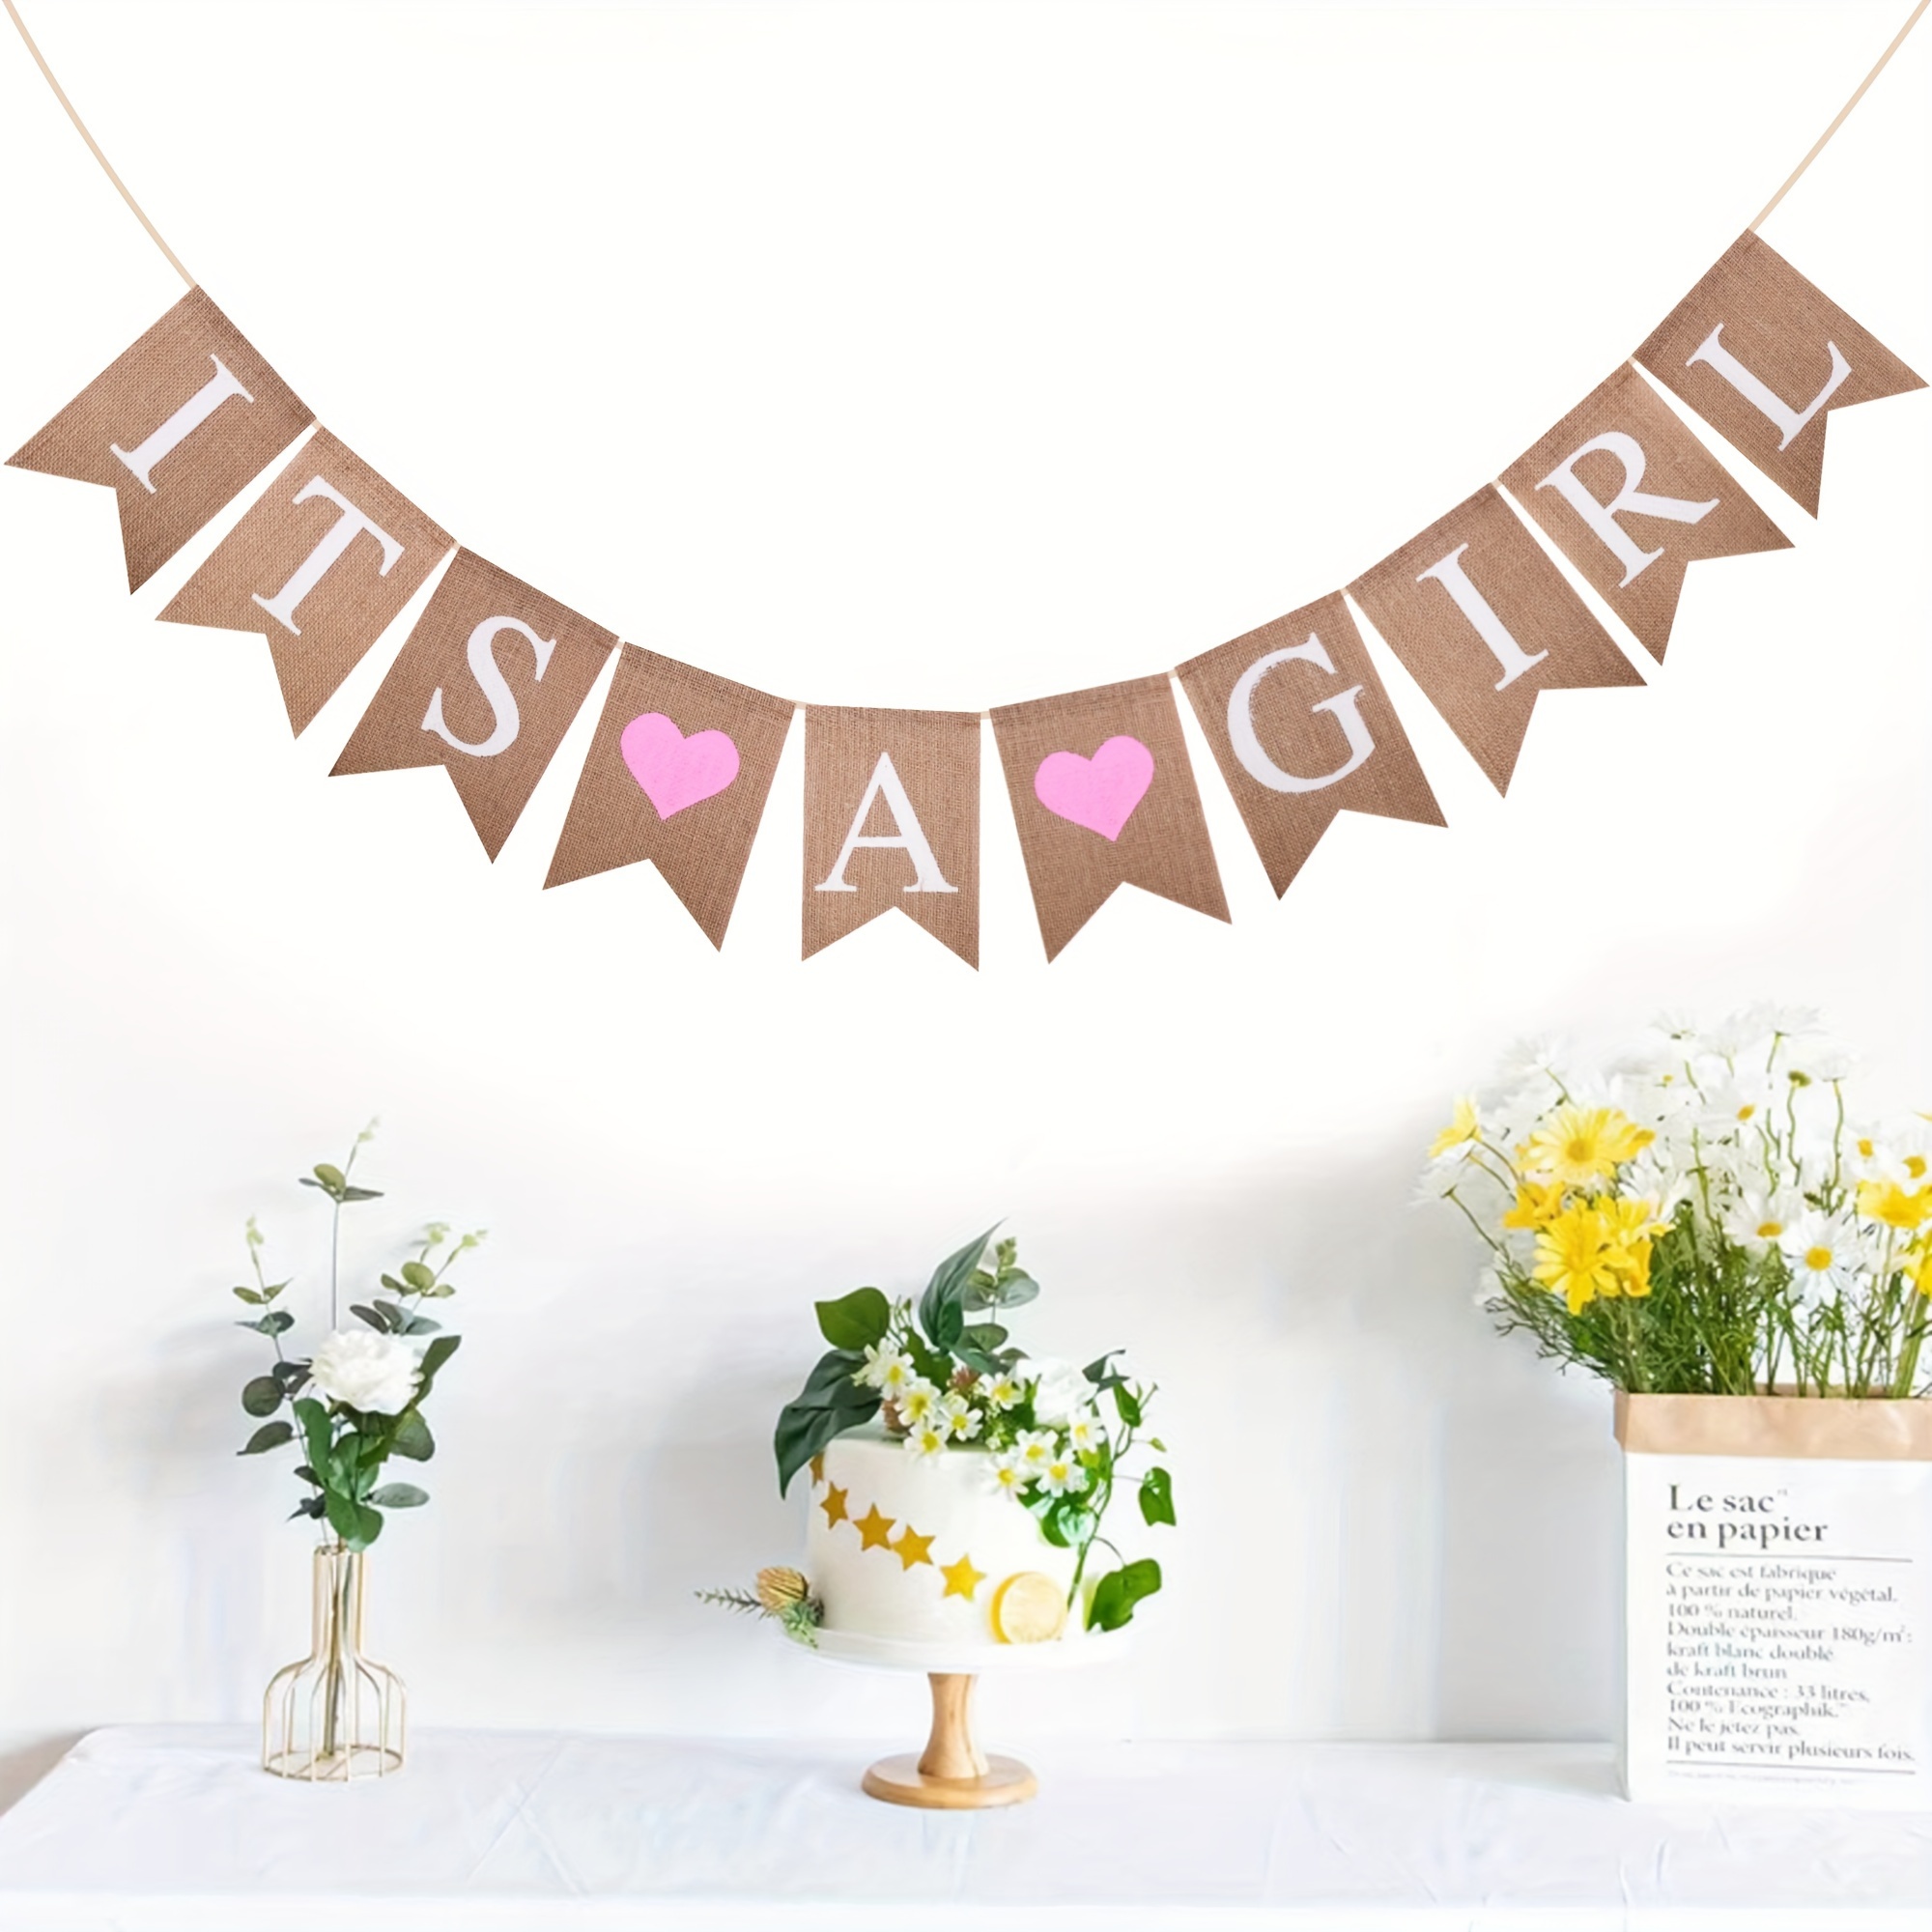 

It's A Girl Pink Heart Burlap Banner, 10pcs - Ideal For Baby Girl Birthday Party & Room Decoration